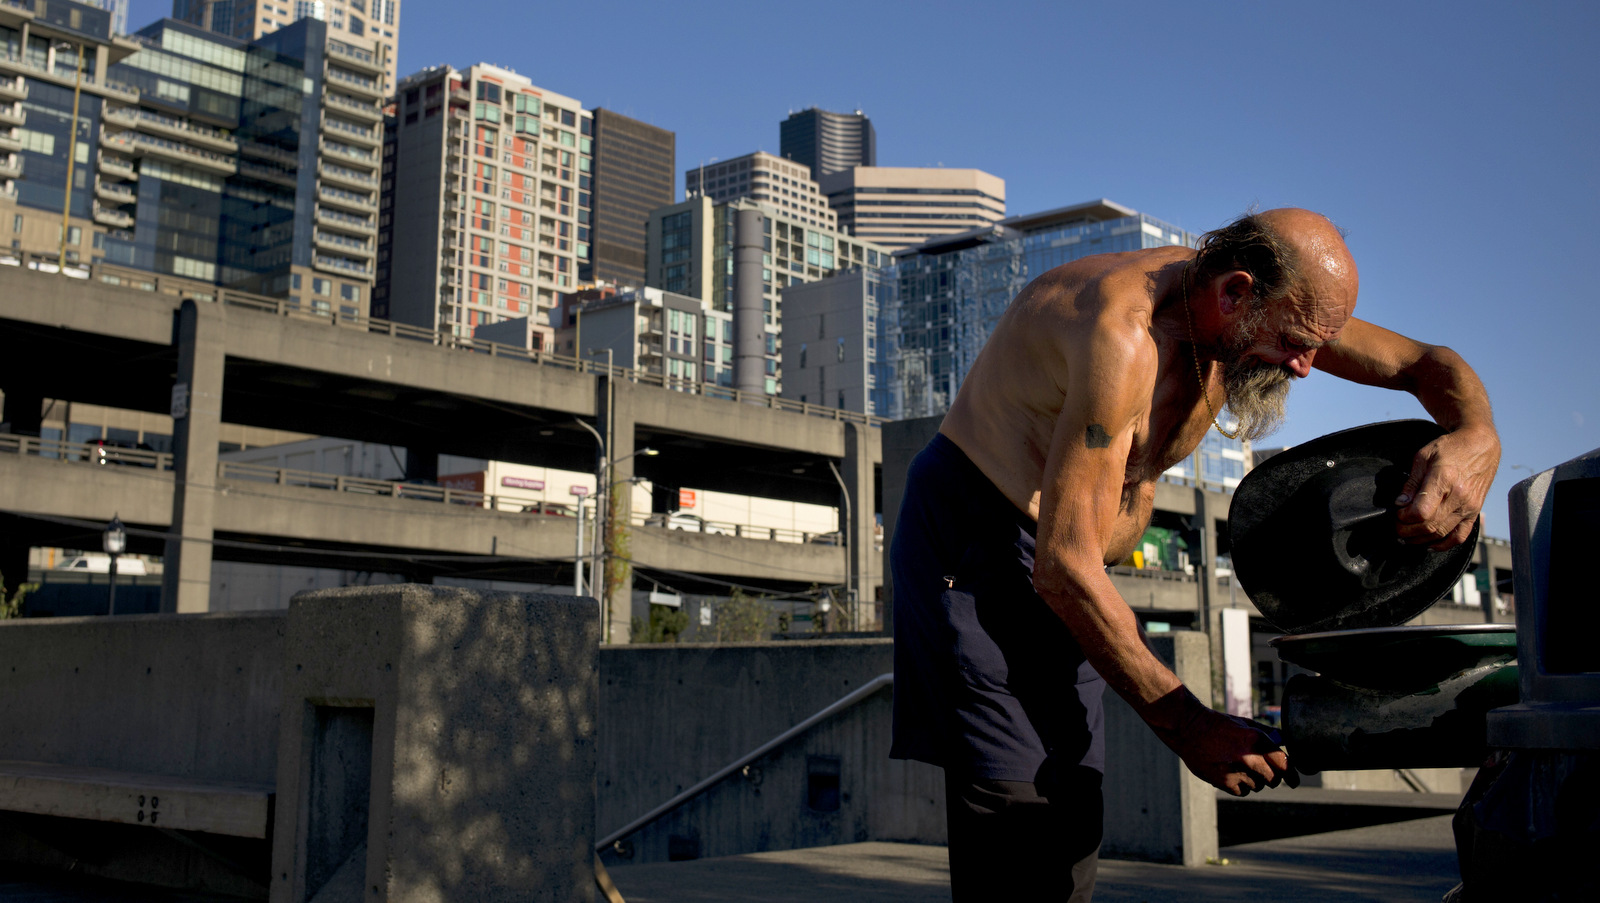 Joseph Nalty, a 64-year-old homeless man dampens his hat to cool off in the Waterfront Park area of Seattle, Sept. 28, 2017. A homeless crisis of unprecedented proportions is rocking the West Coast, and its victims are being left behind by the very things that mark the region's success: soaring housing costs, rock-bottom vacancy rates and a roaring economy. (AP/Jae C. Hong)